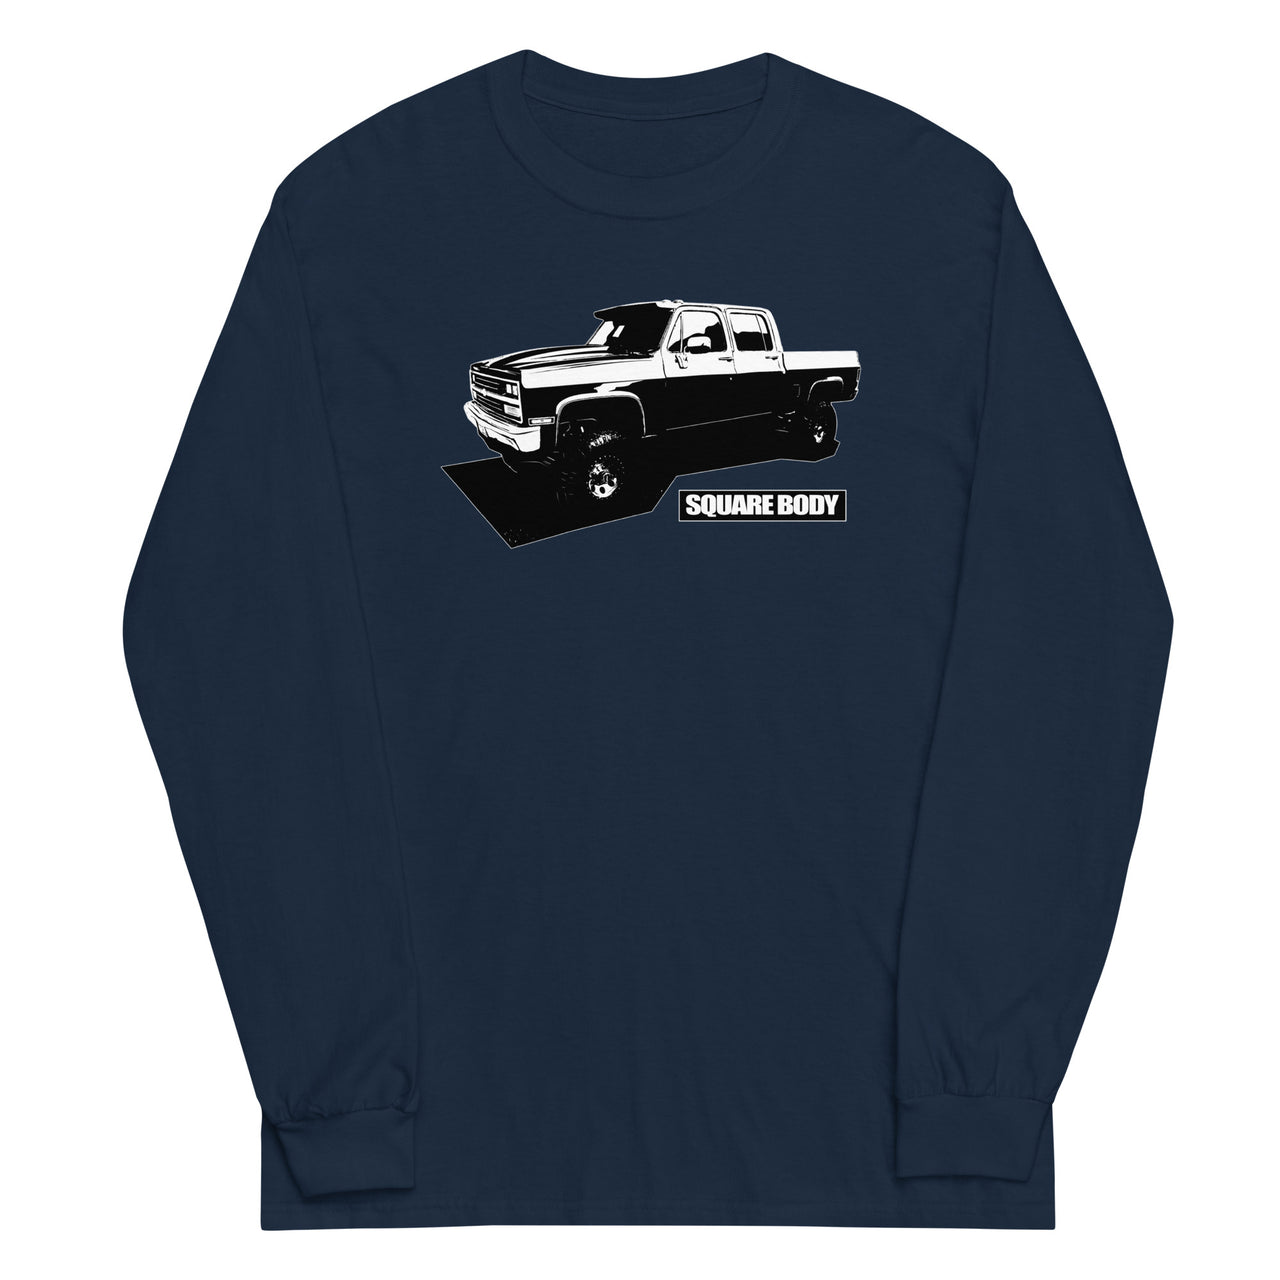 Crew Cab Square Body Truck Long Sleeve Shirt in navy